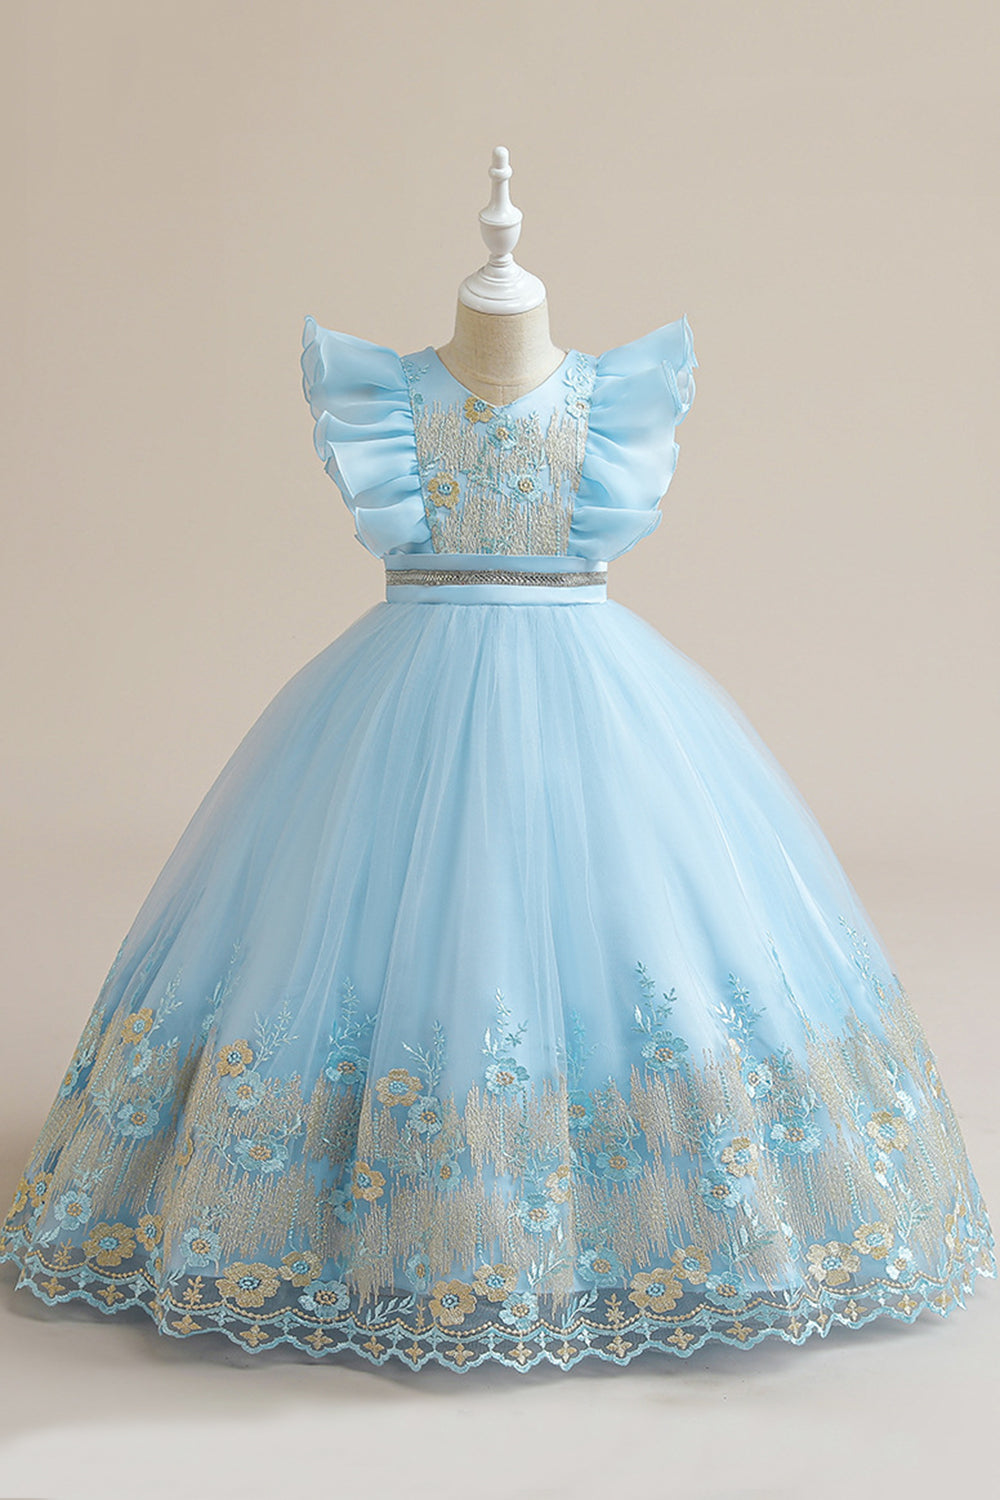 Blue A Line Tulle Girl Dress with Embroidery